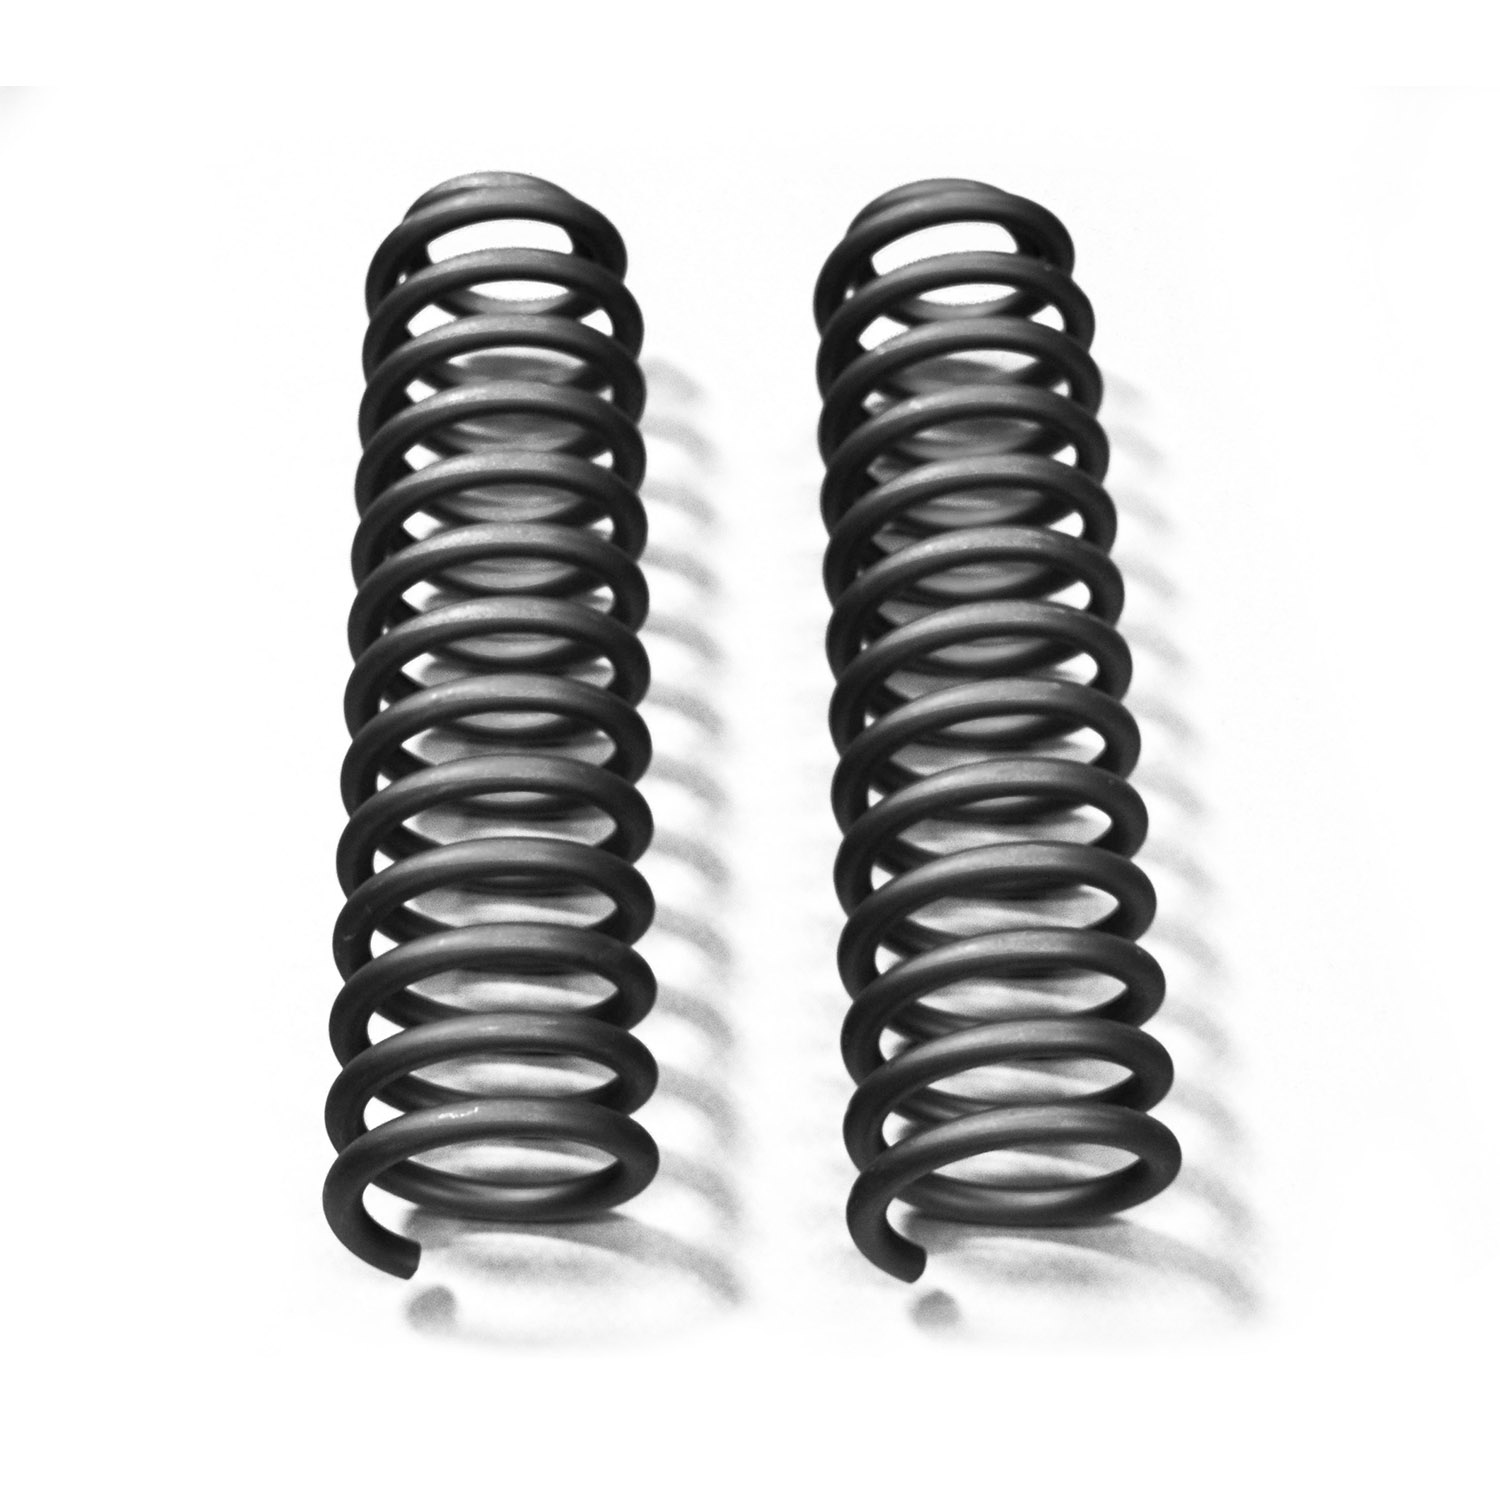 Jeep JK Wrangler 2.5 inch Lift Front Coil Springs